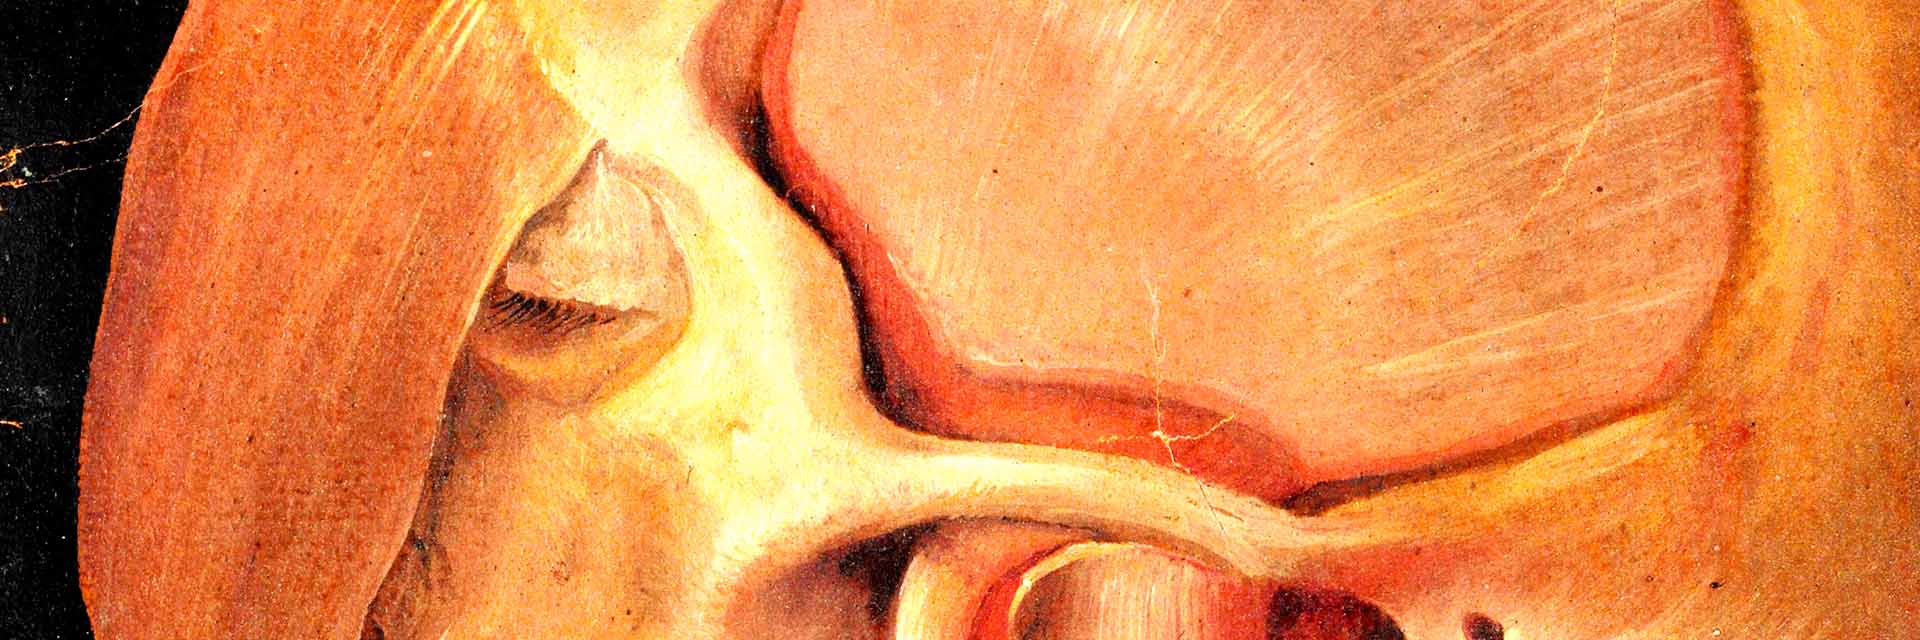 Analysis and Synthesis in 16th-Century Anatomy